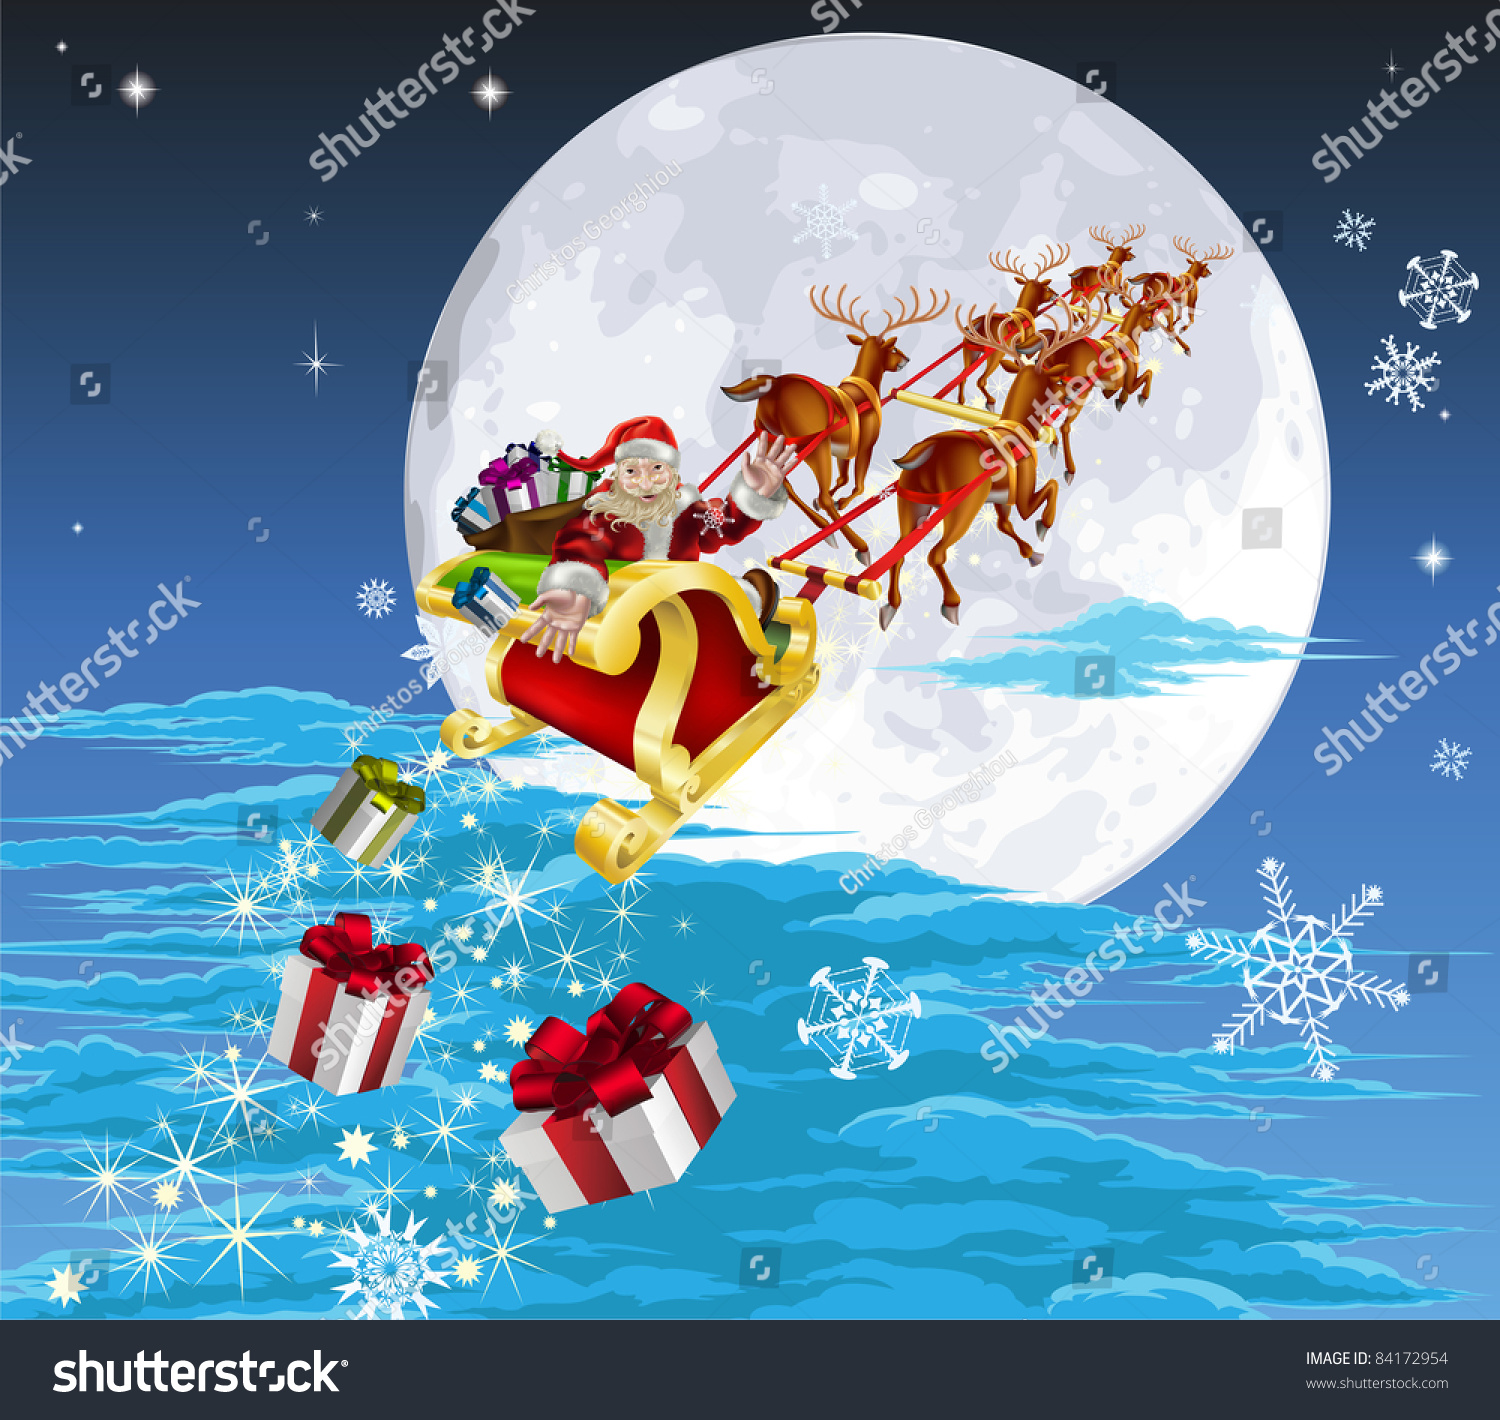 Top 97+ Wallpaper Pictures Of Santa On His Sleigh Full HD, 2k, 4k